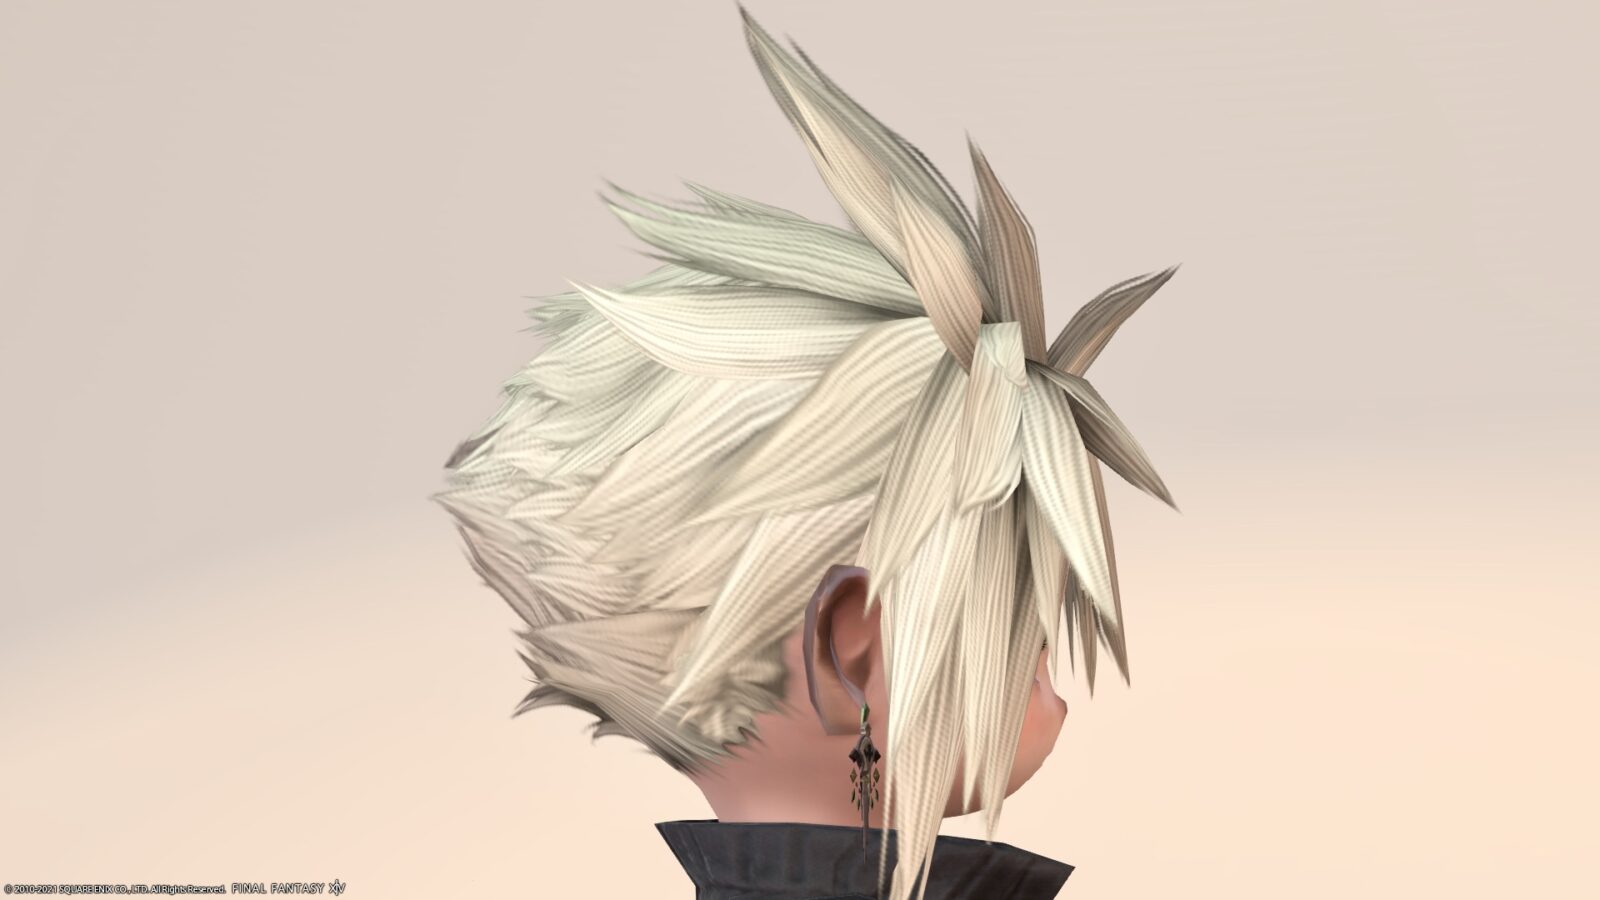 Glamour With Cloud S Hairstyle And Advent Attire Lalafell S Small Cloud Norirow Note エオルゼア戦記 Ff14ブログ